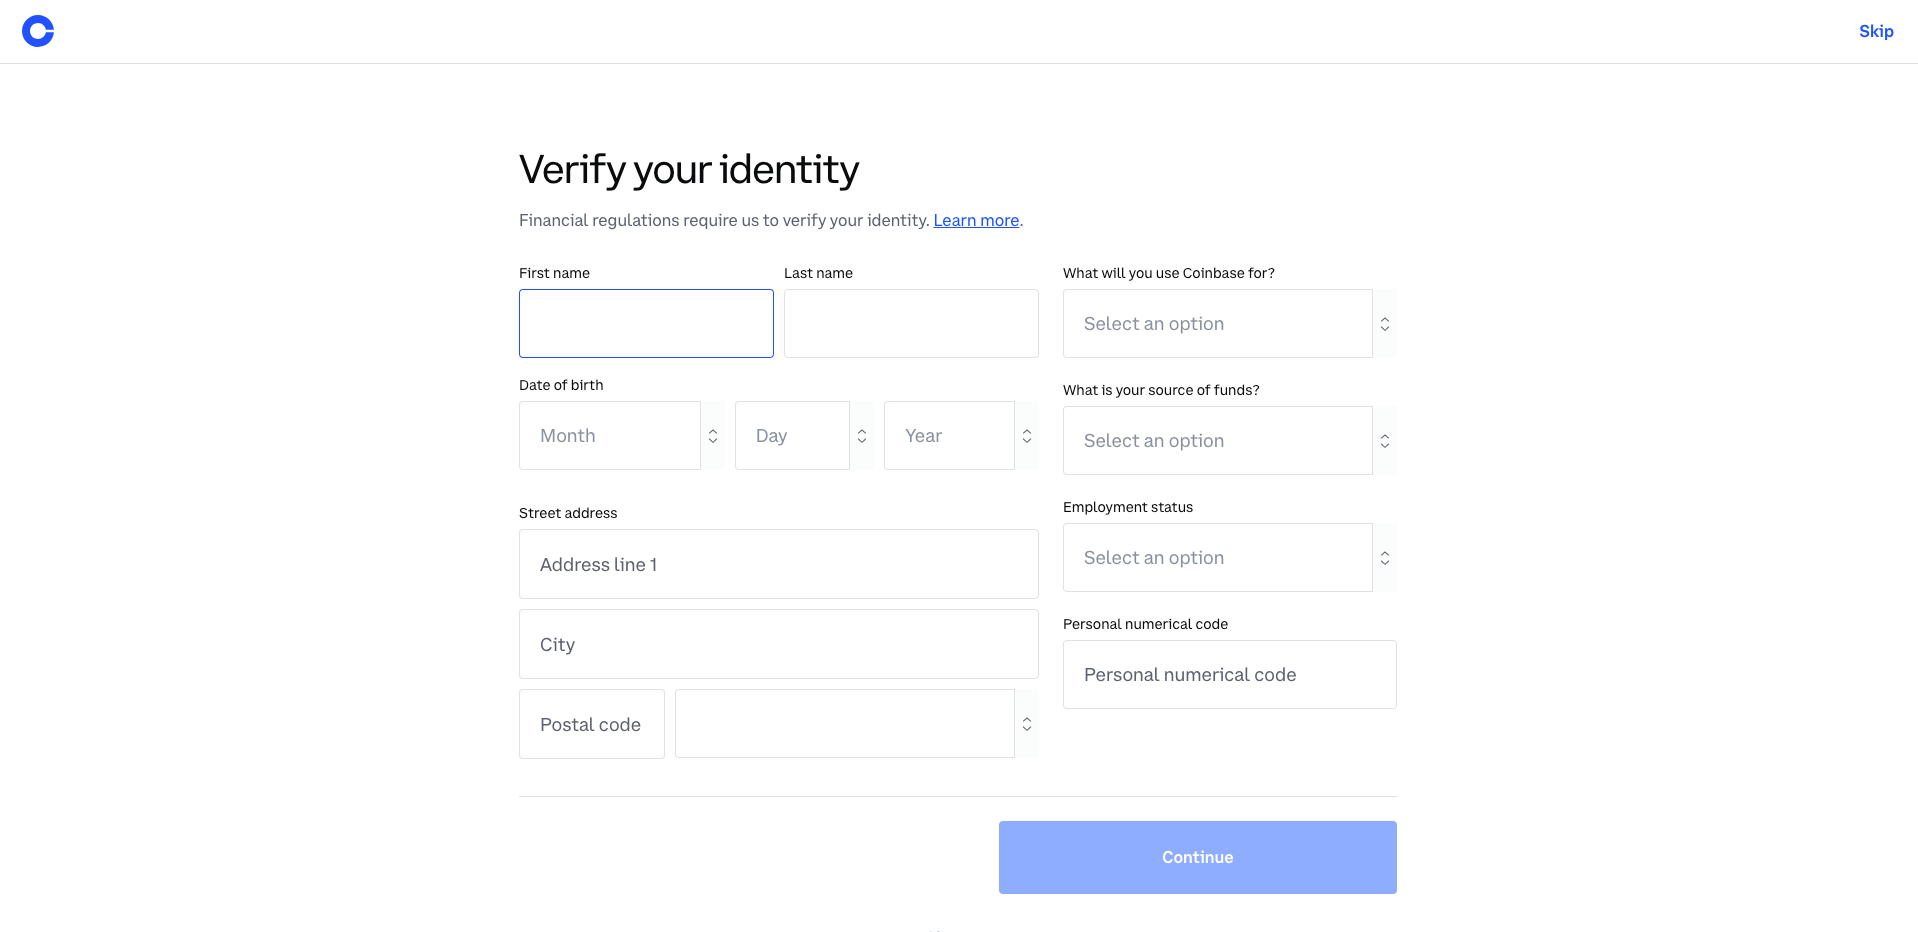 7. Verify your identity by providing information such as address, birth date, and what you want to do on Coinbase;  